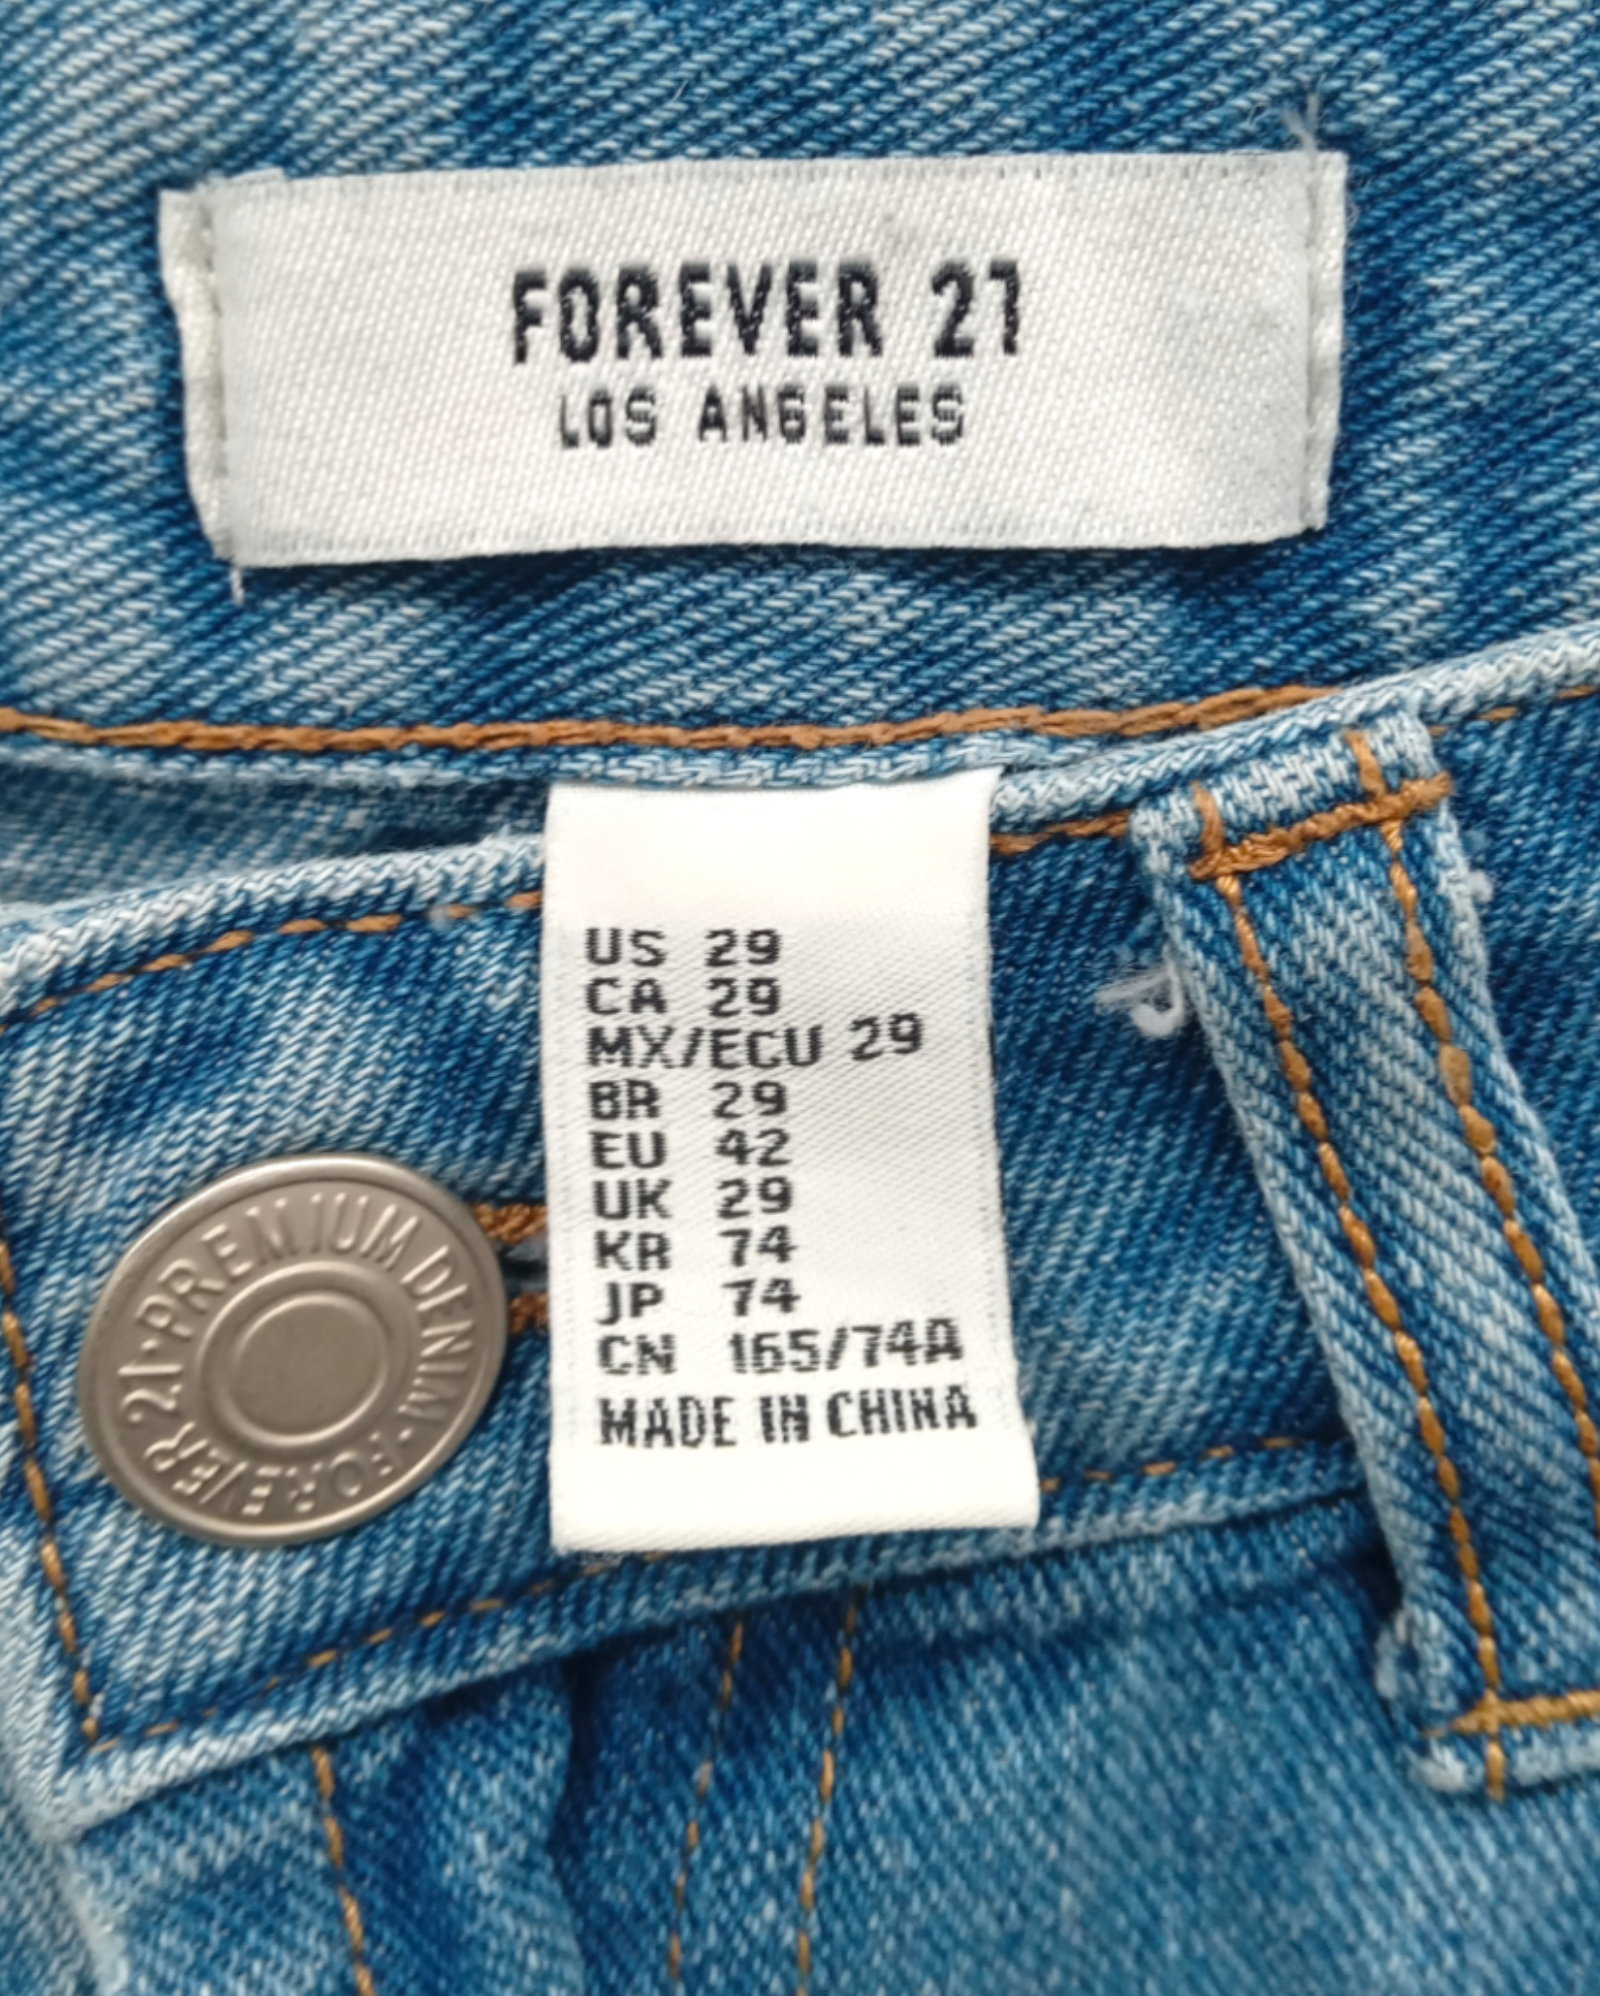 Shorts Jeans Forever 21